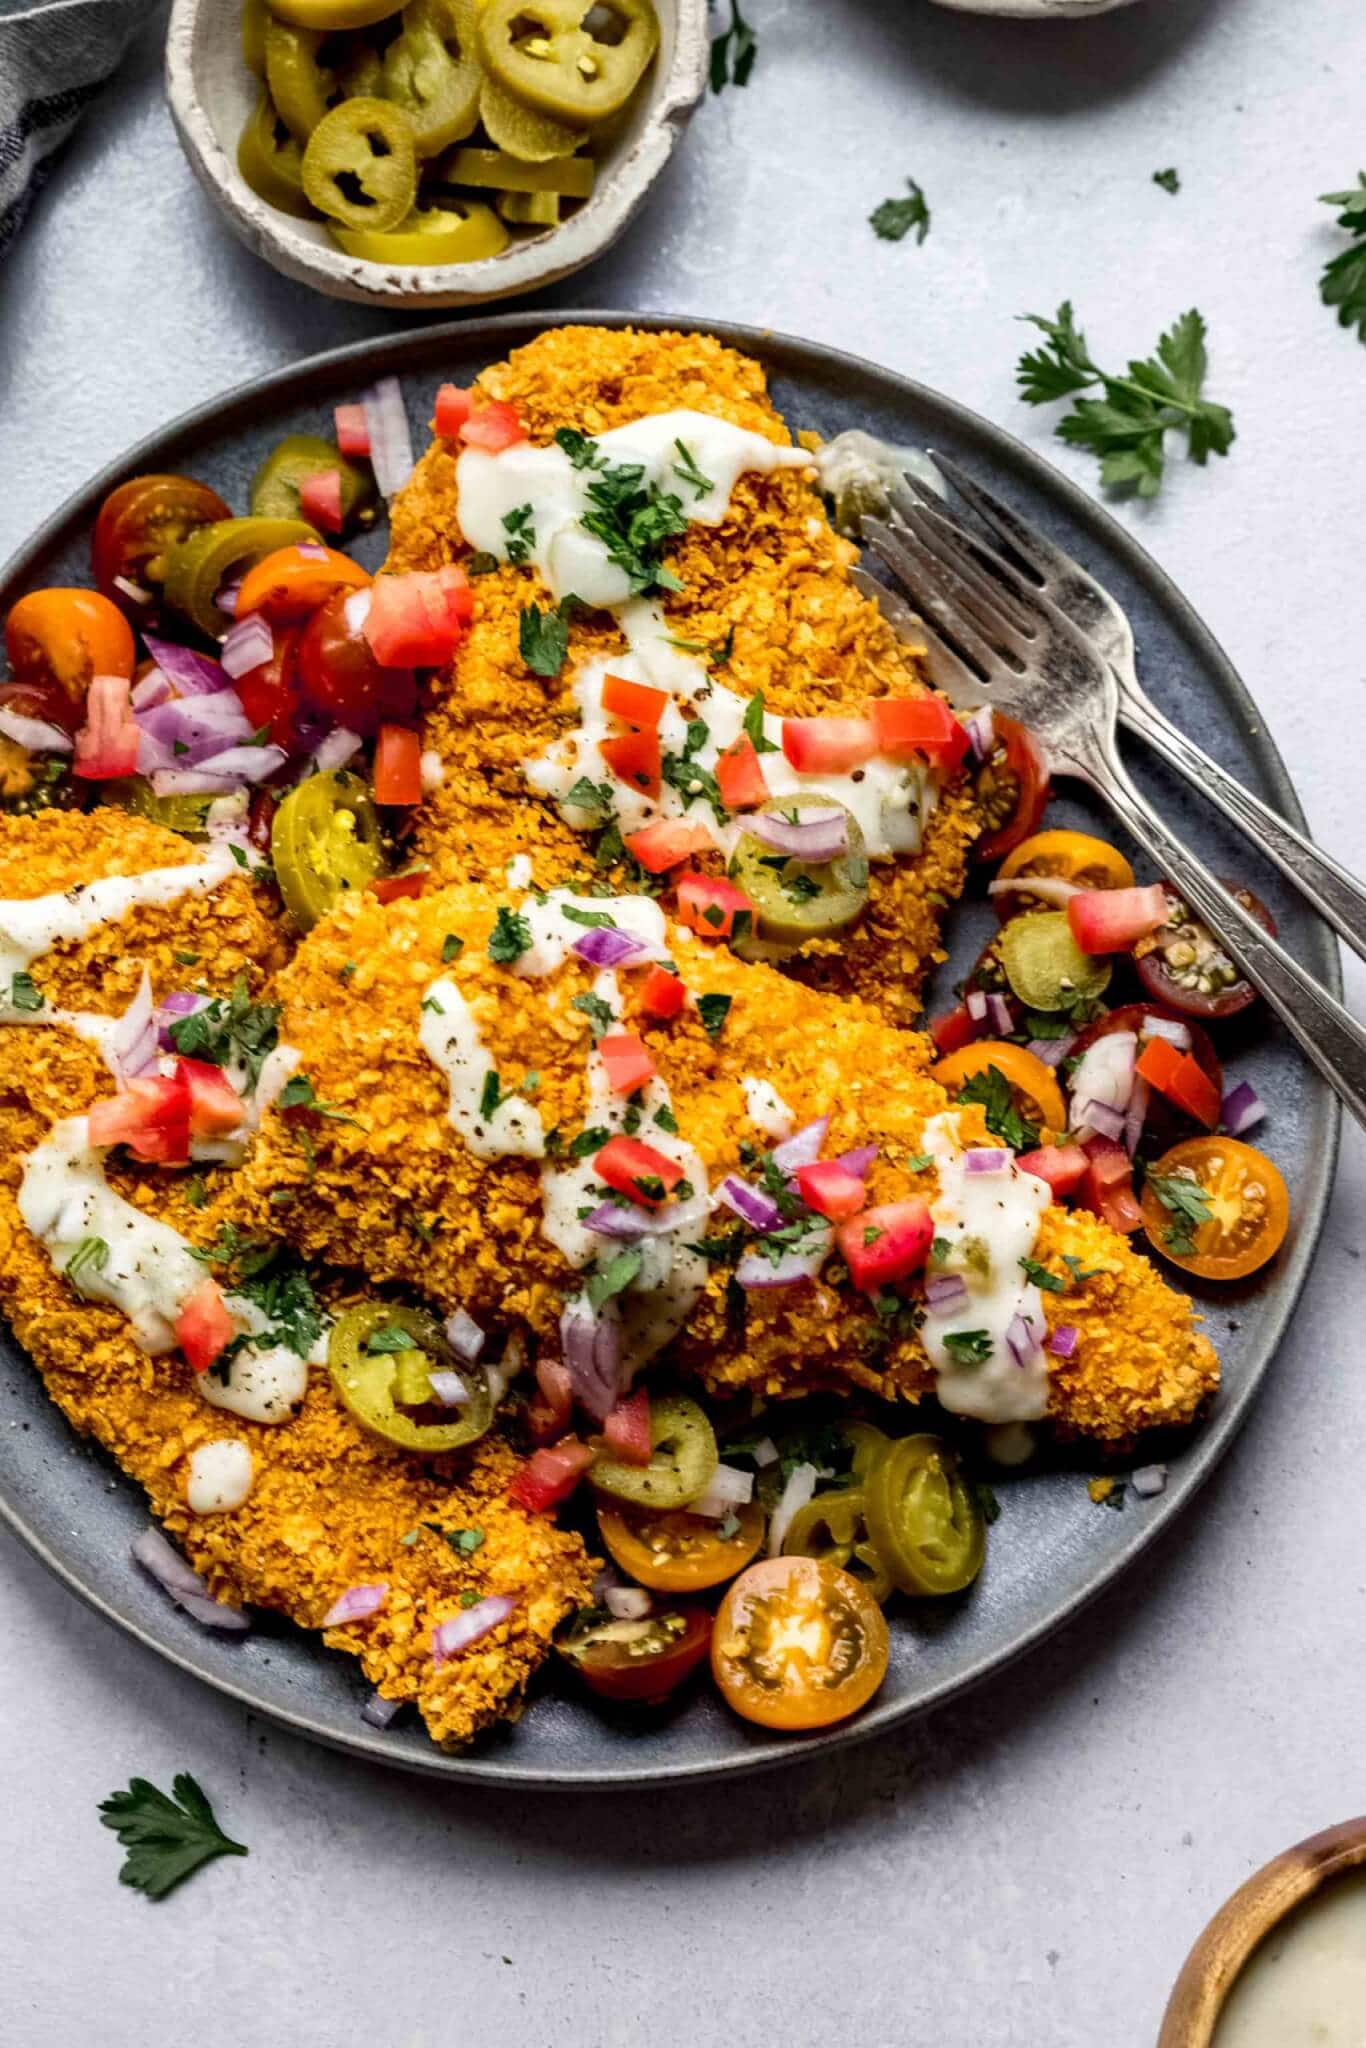 Tortilla chip crusted chicken cutlets arranged on plate topped with queso, tomatoes and red onion.